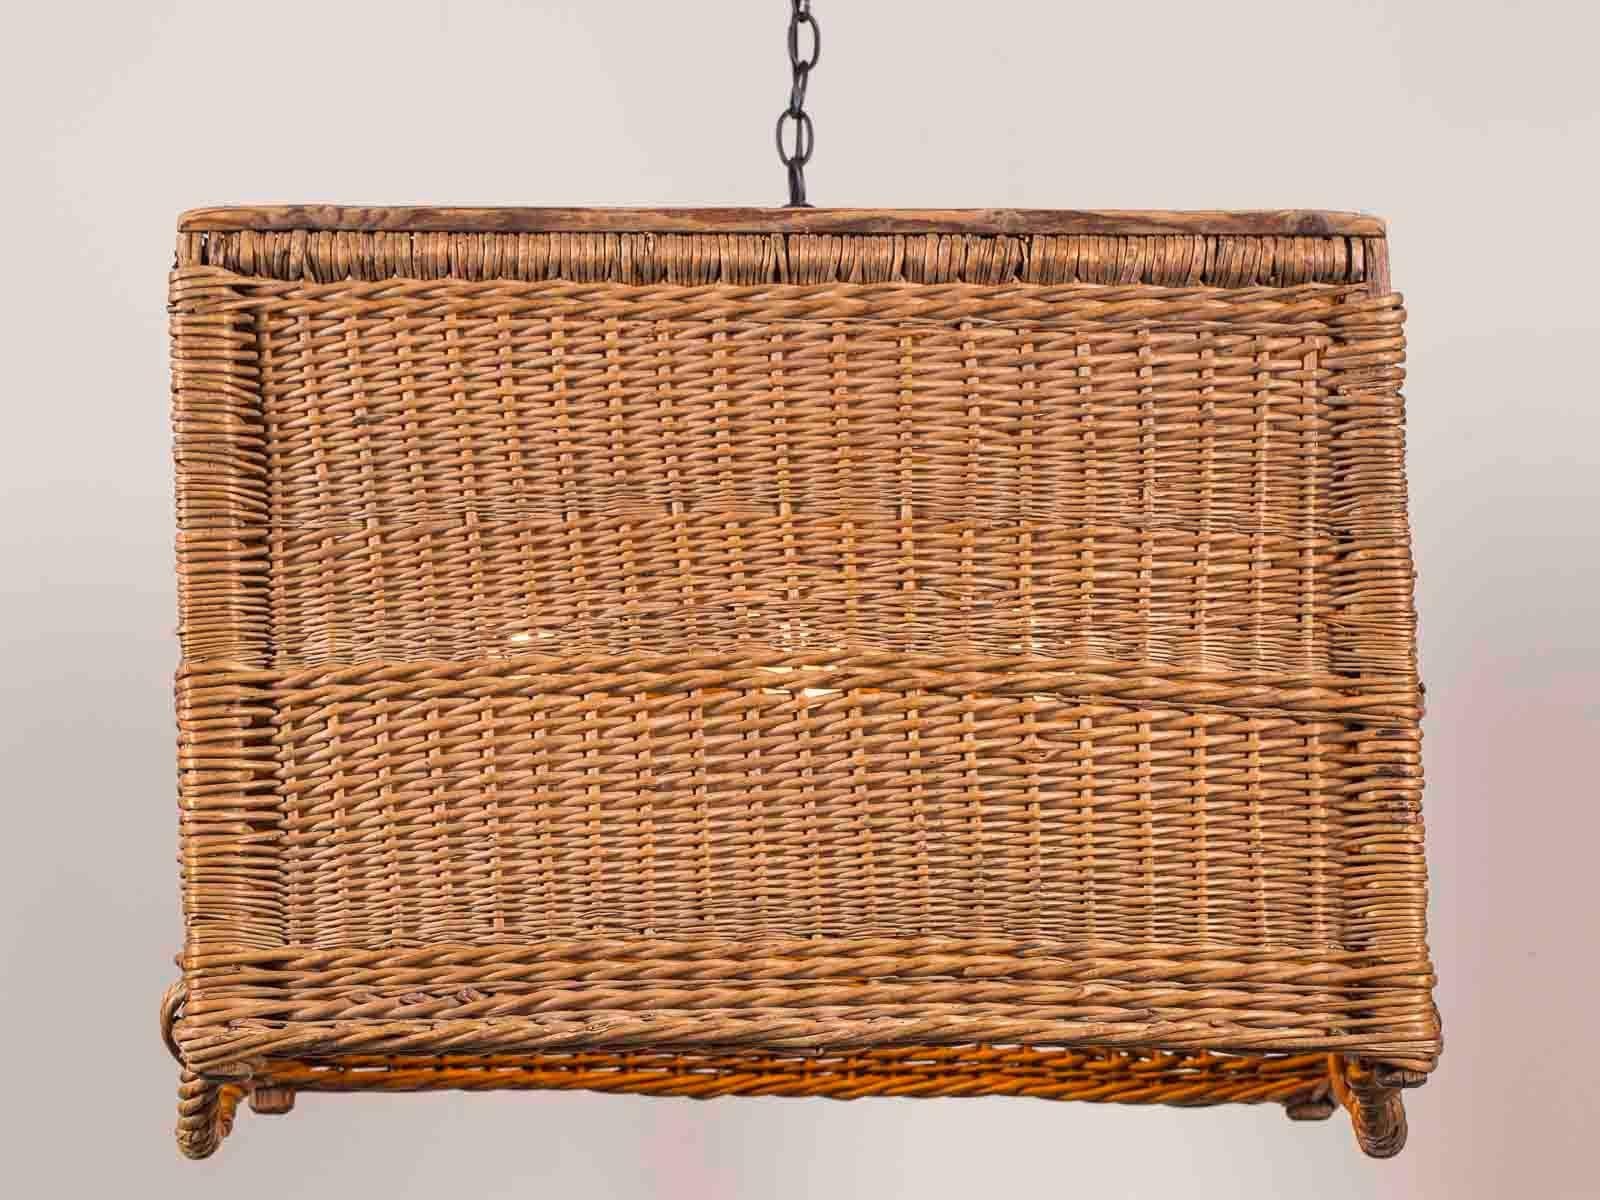 This large vintage French rectangular woven wicker basket from France, circa 1920 has been made into a custom chandelier fixture with the addition of a handmade light source concealed within the interior. Please enlarge the photographs to see the